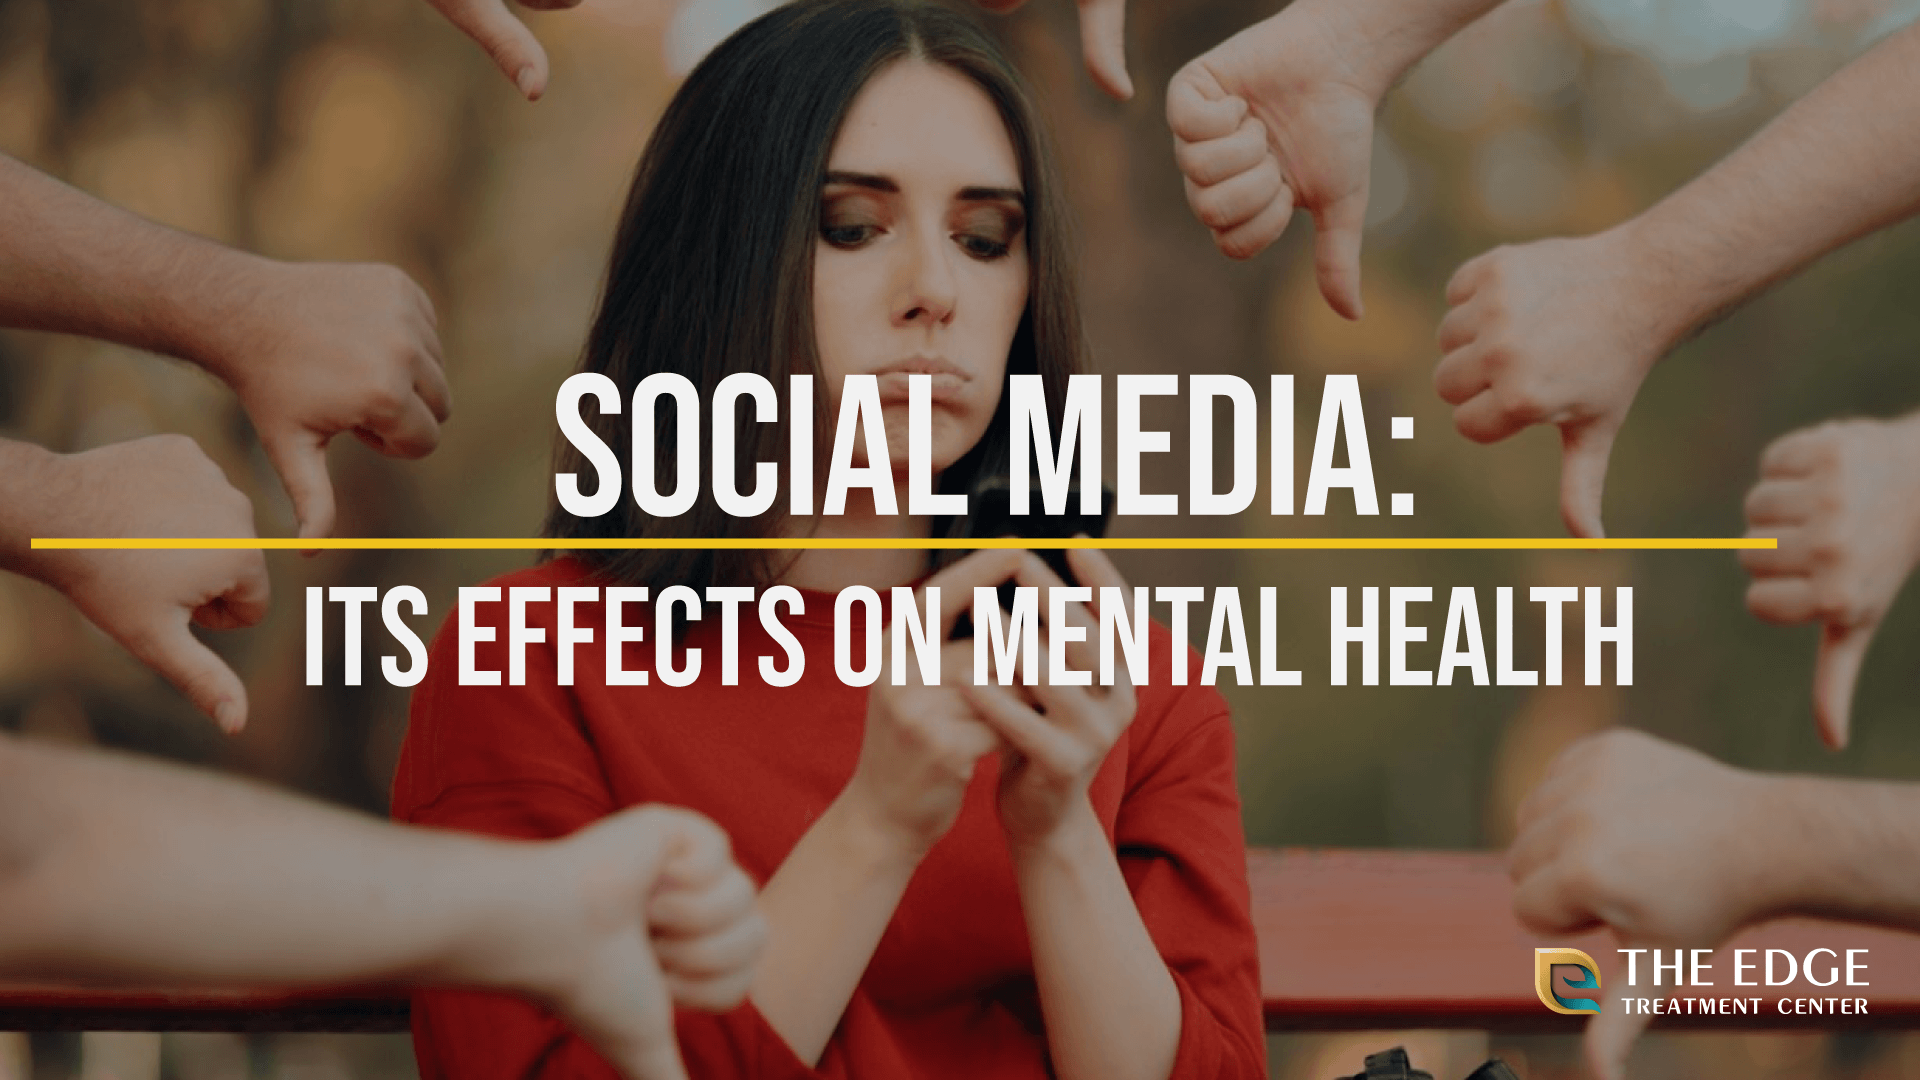 The Effects of Social Media on Mental Health